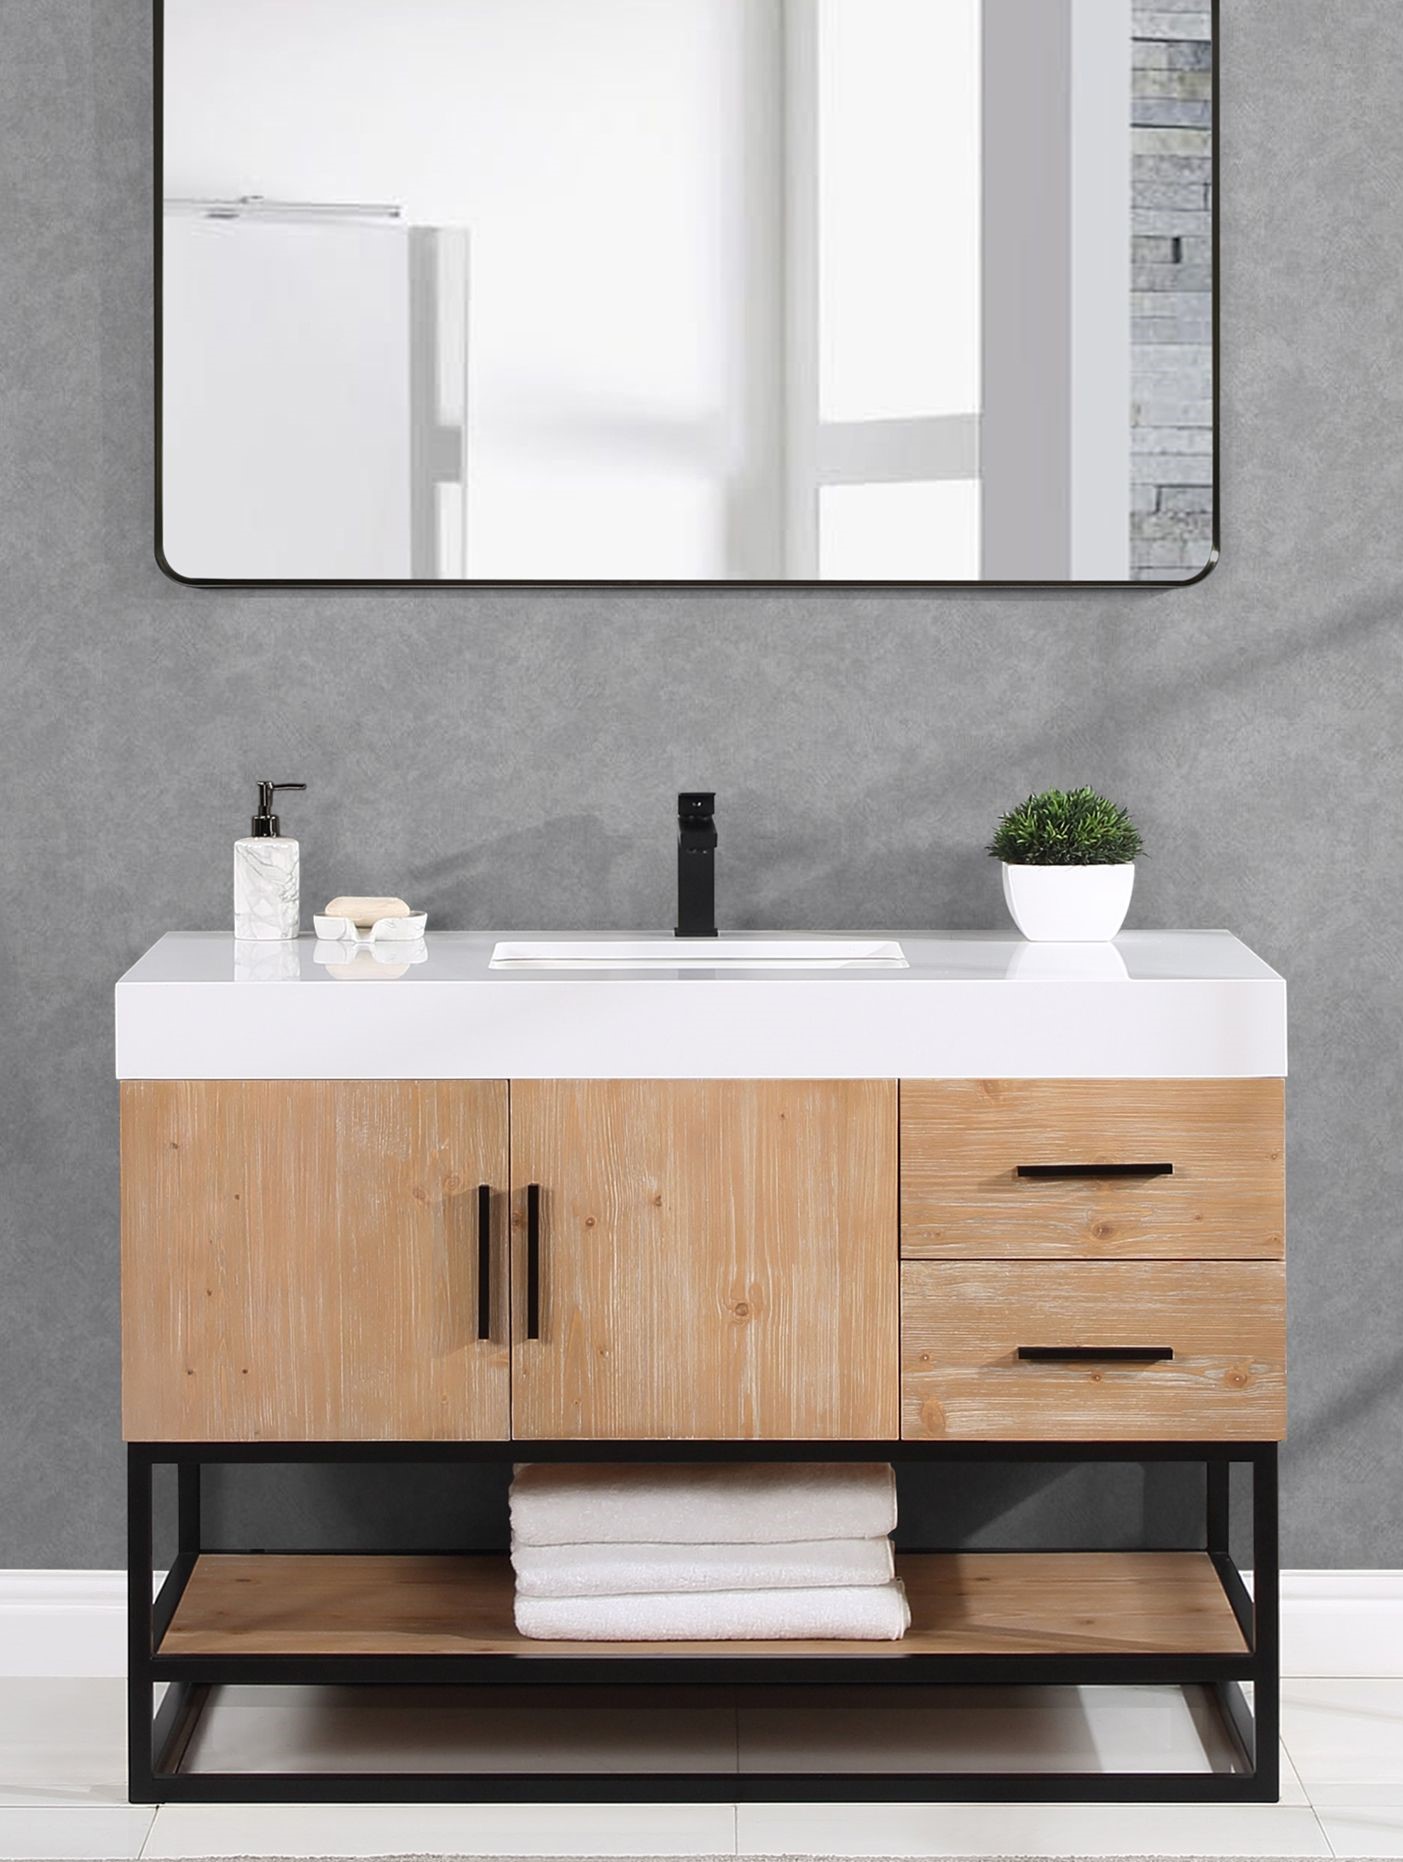 Issac Edwards 48" Single Bathroom Vanity in Light Brown with Matte Black Support Base and White Composite Stone Countertop with Mirror